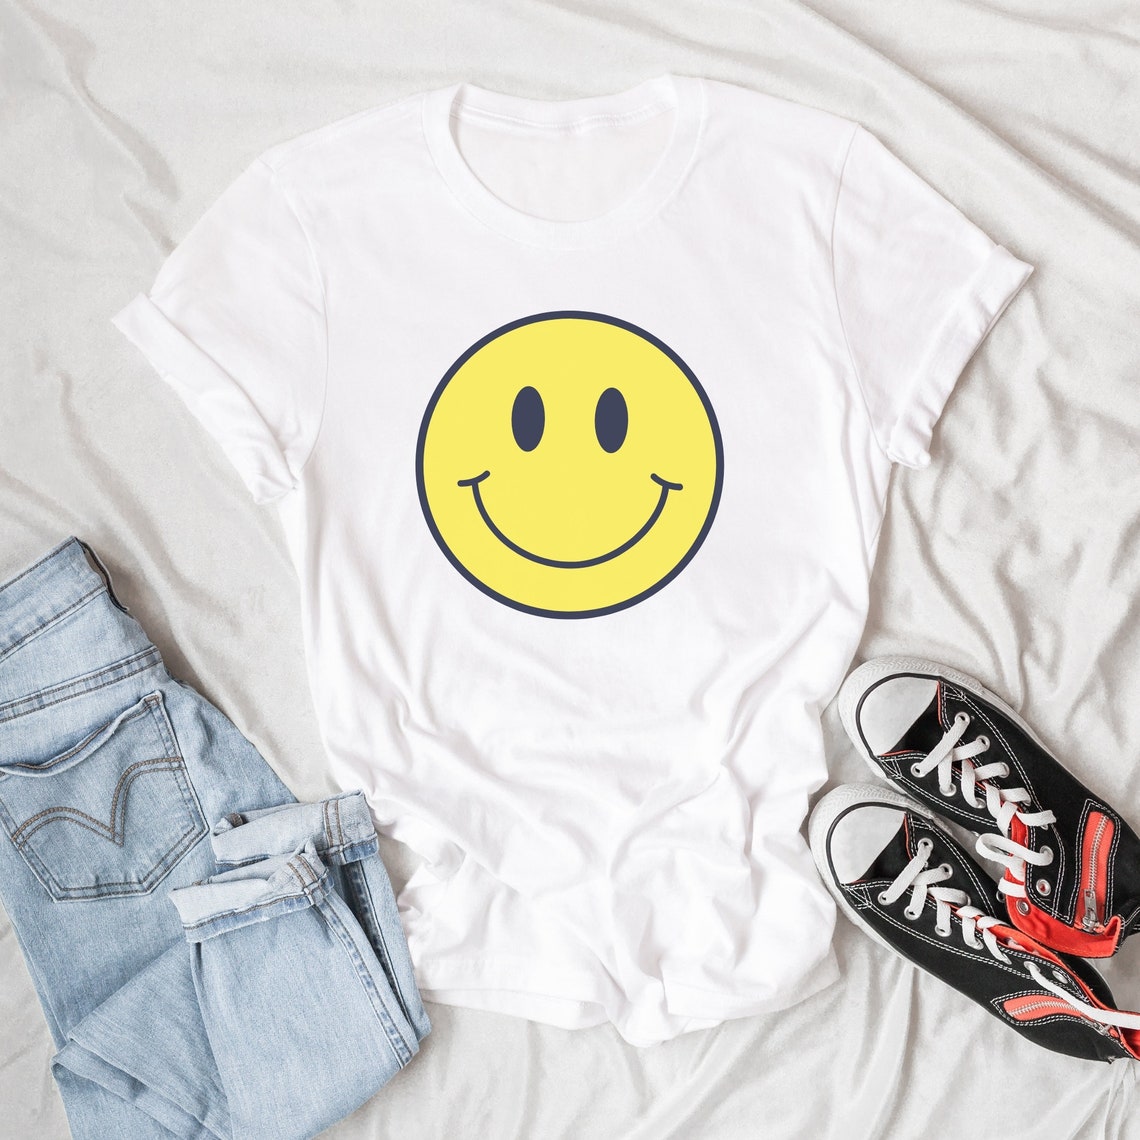 Smiley Face T-Shirt Smile Shirt Vintage Smiley Face Tshirt | Etsy